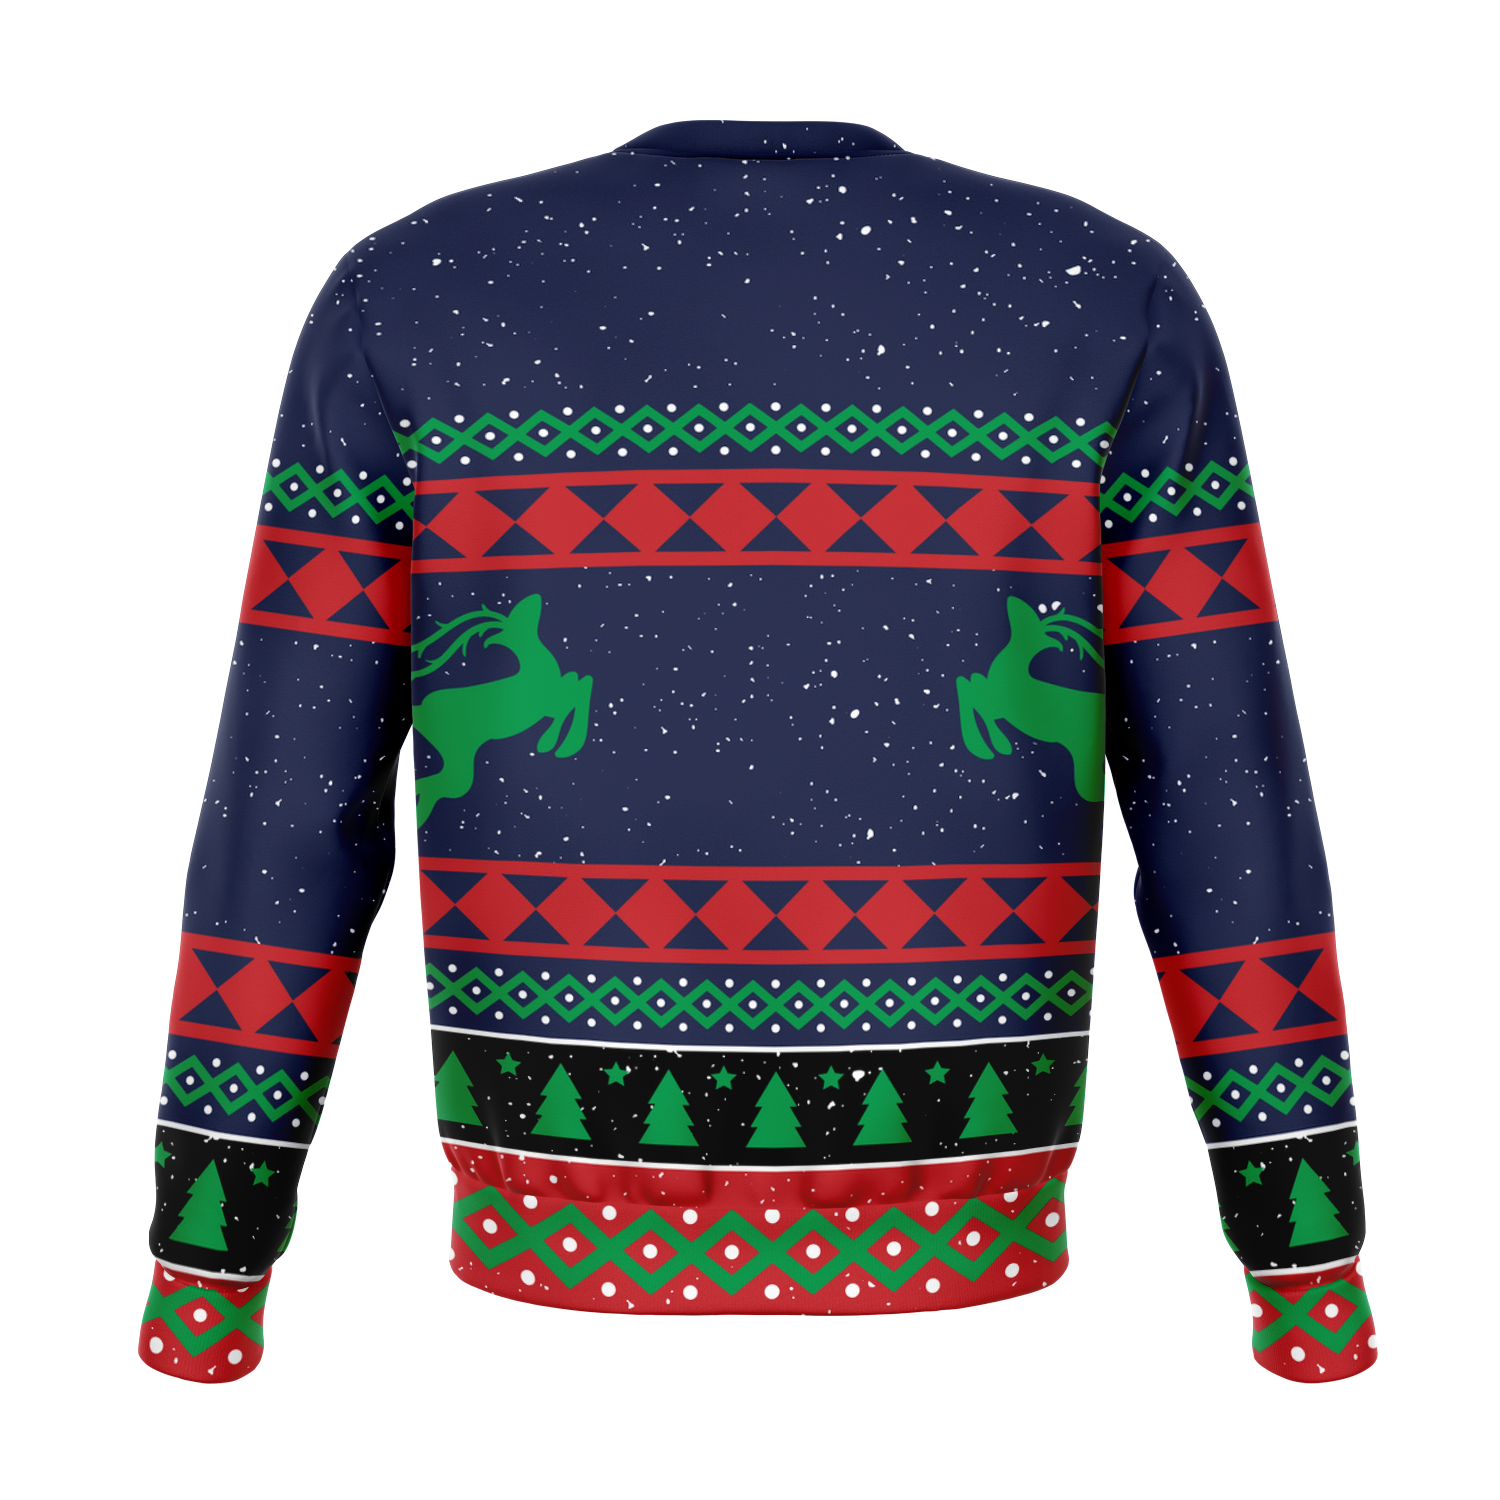 ANGRY ELF UGLY XMAS SWEATER